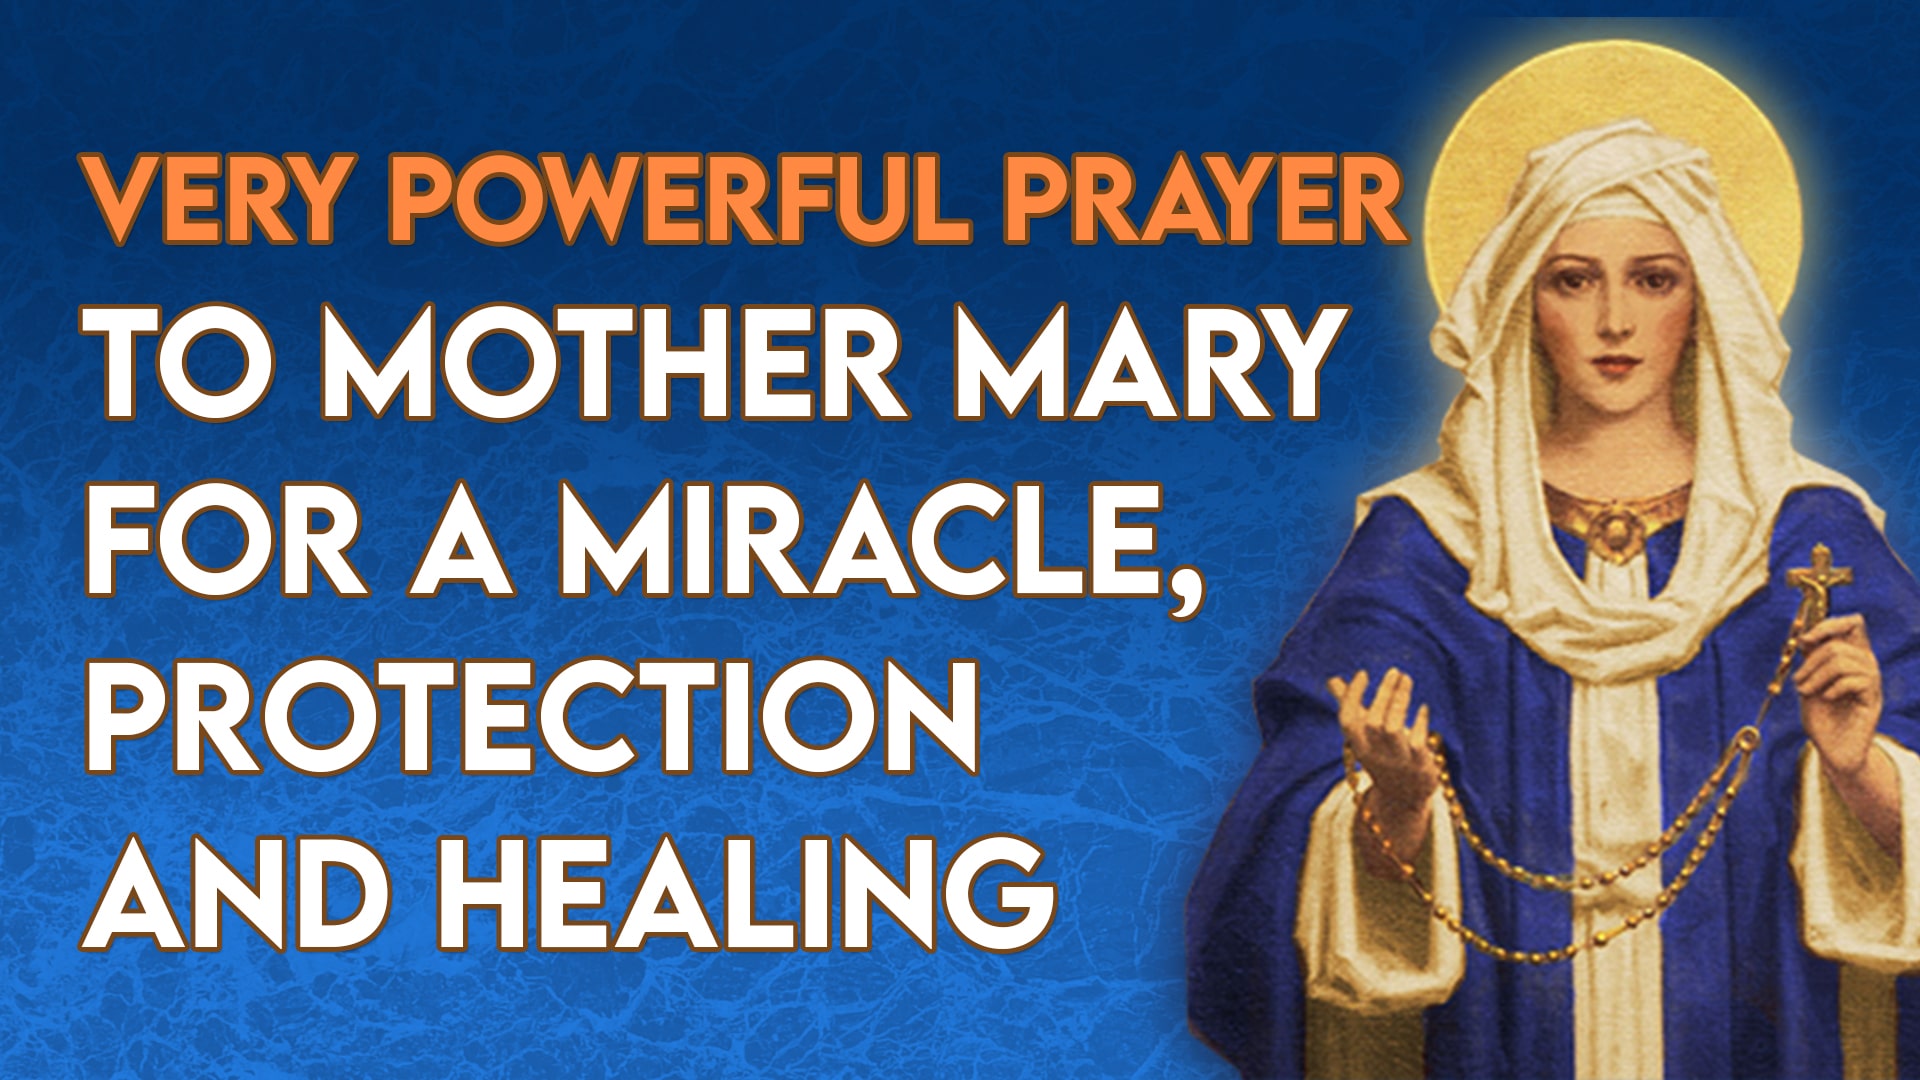 Very Powerful Prayer To Mother Mary For A Miracle